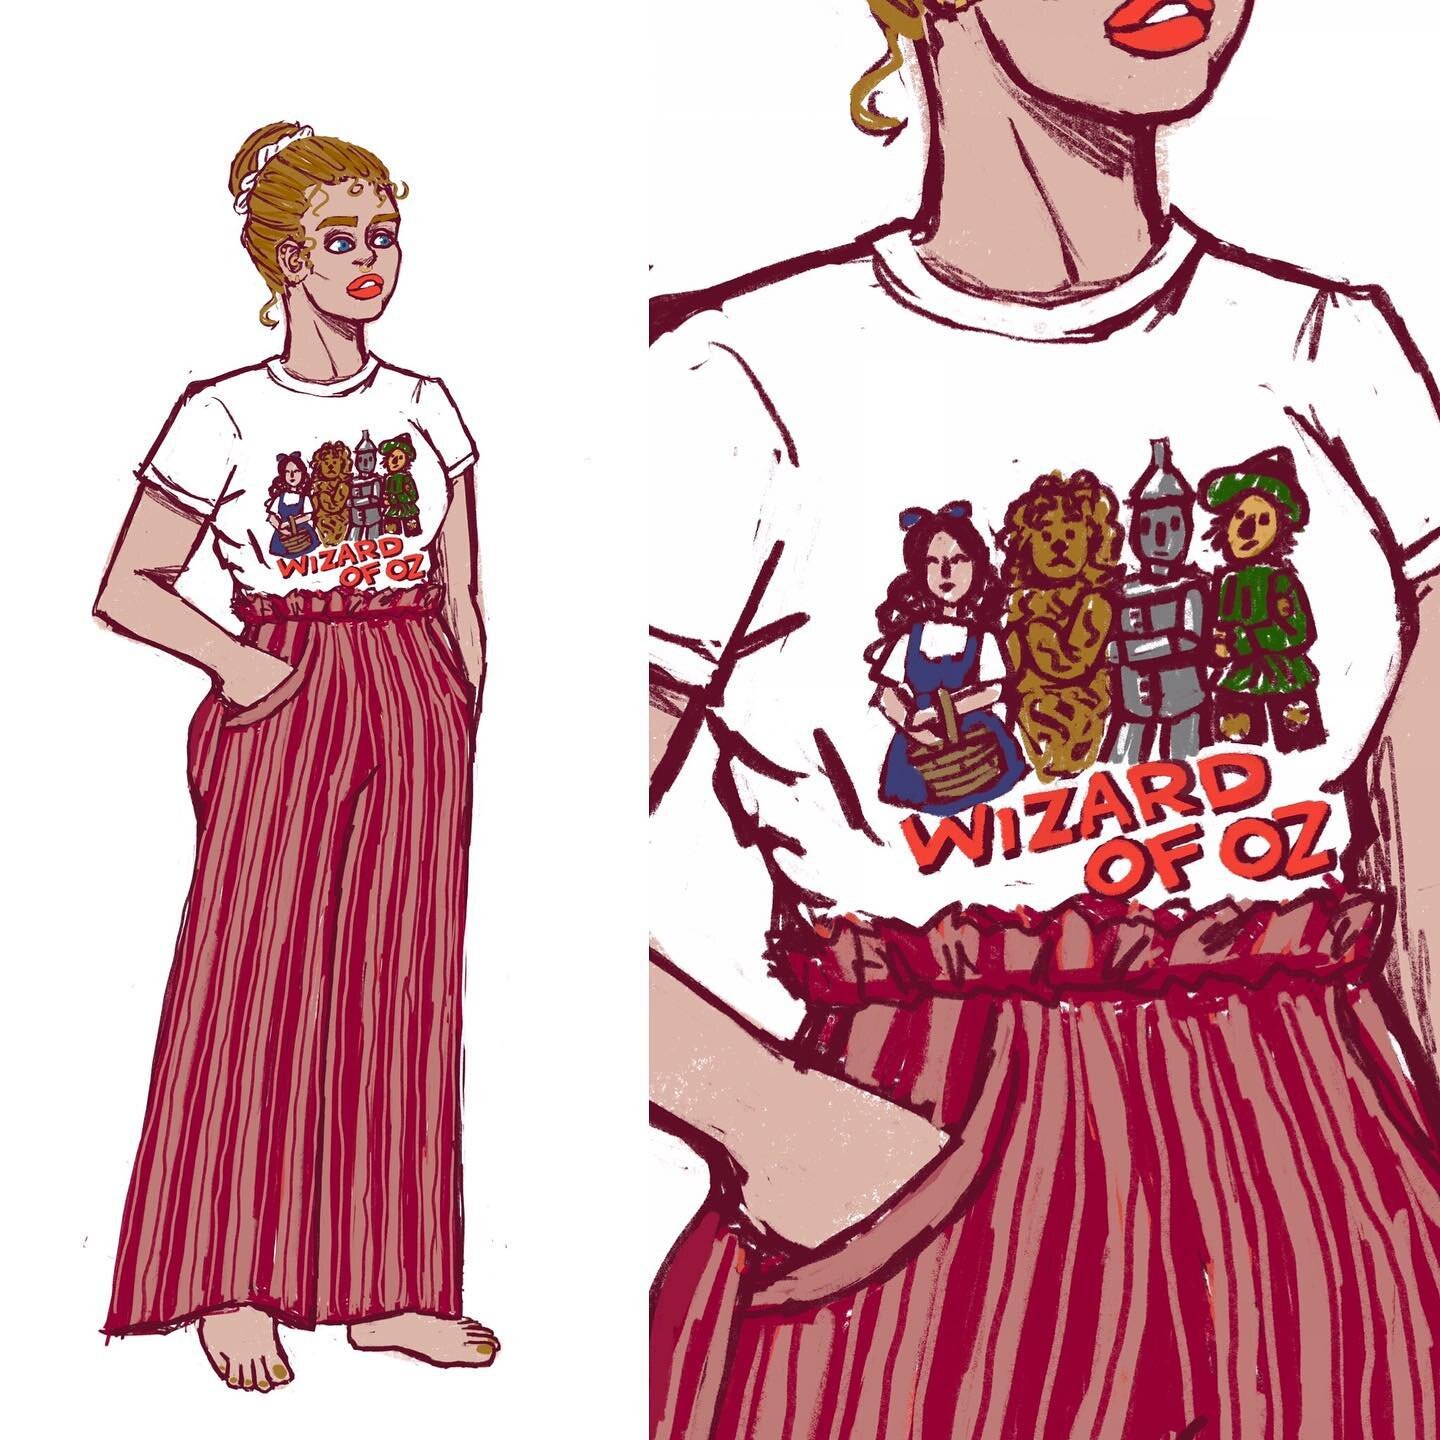 Outfit of the day featuring very cute versions of wizard of oz characters 
#sketch #digitalart #digitaldrawing #digitalartist #ootd #outfit #outfitoftheday #fashion #wizardofoz #wfh